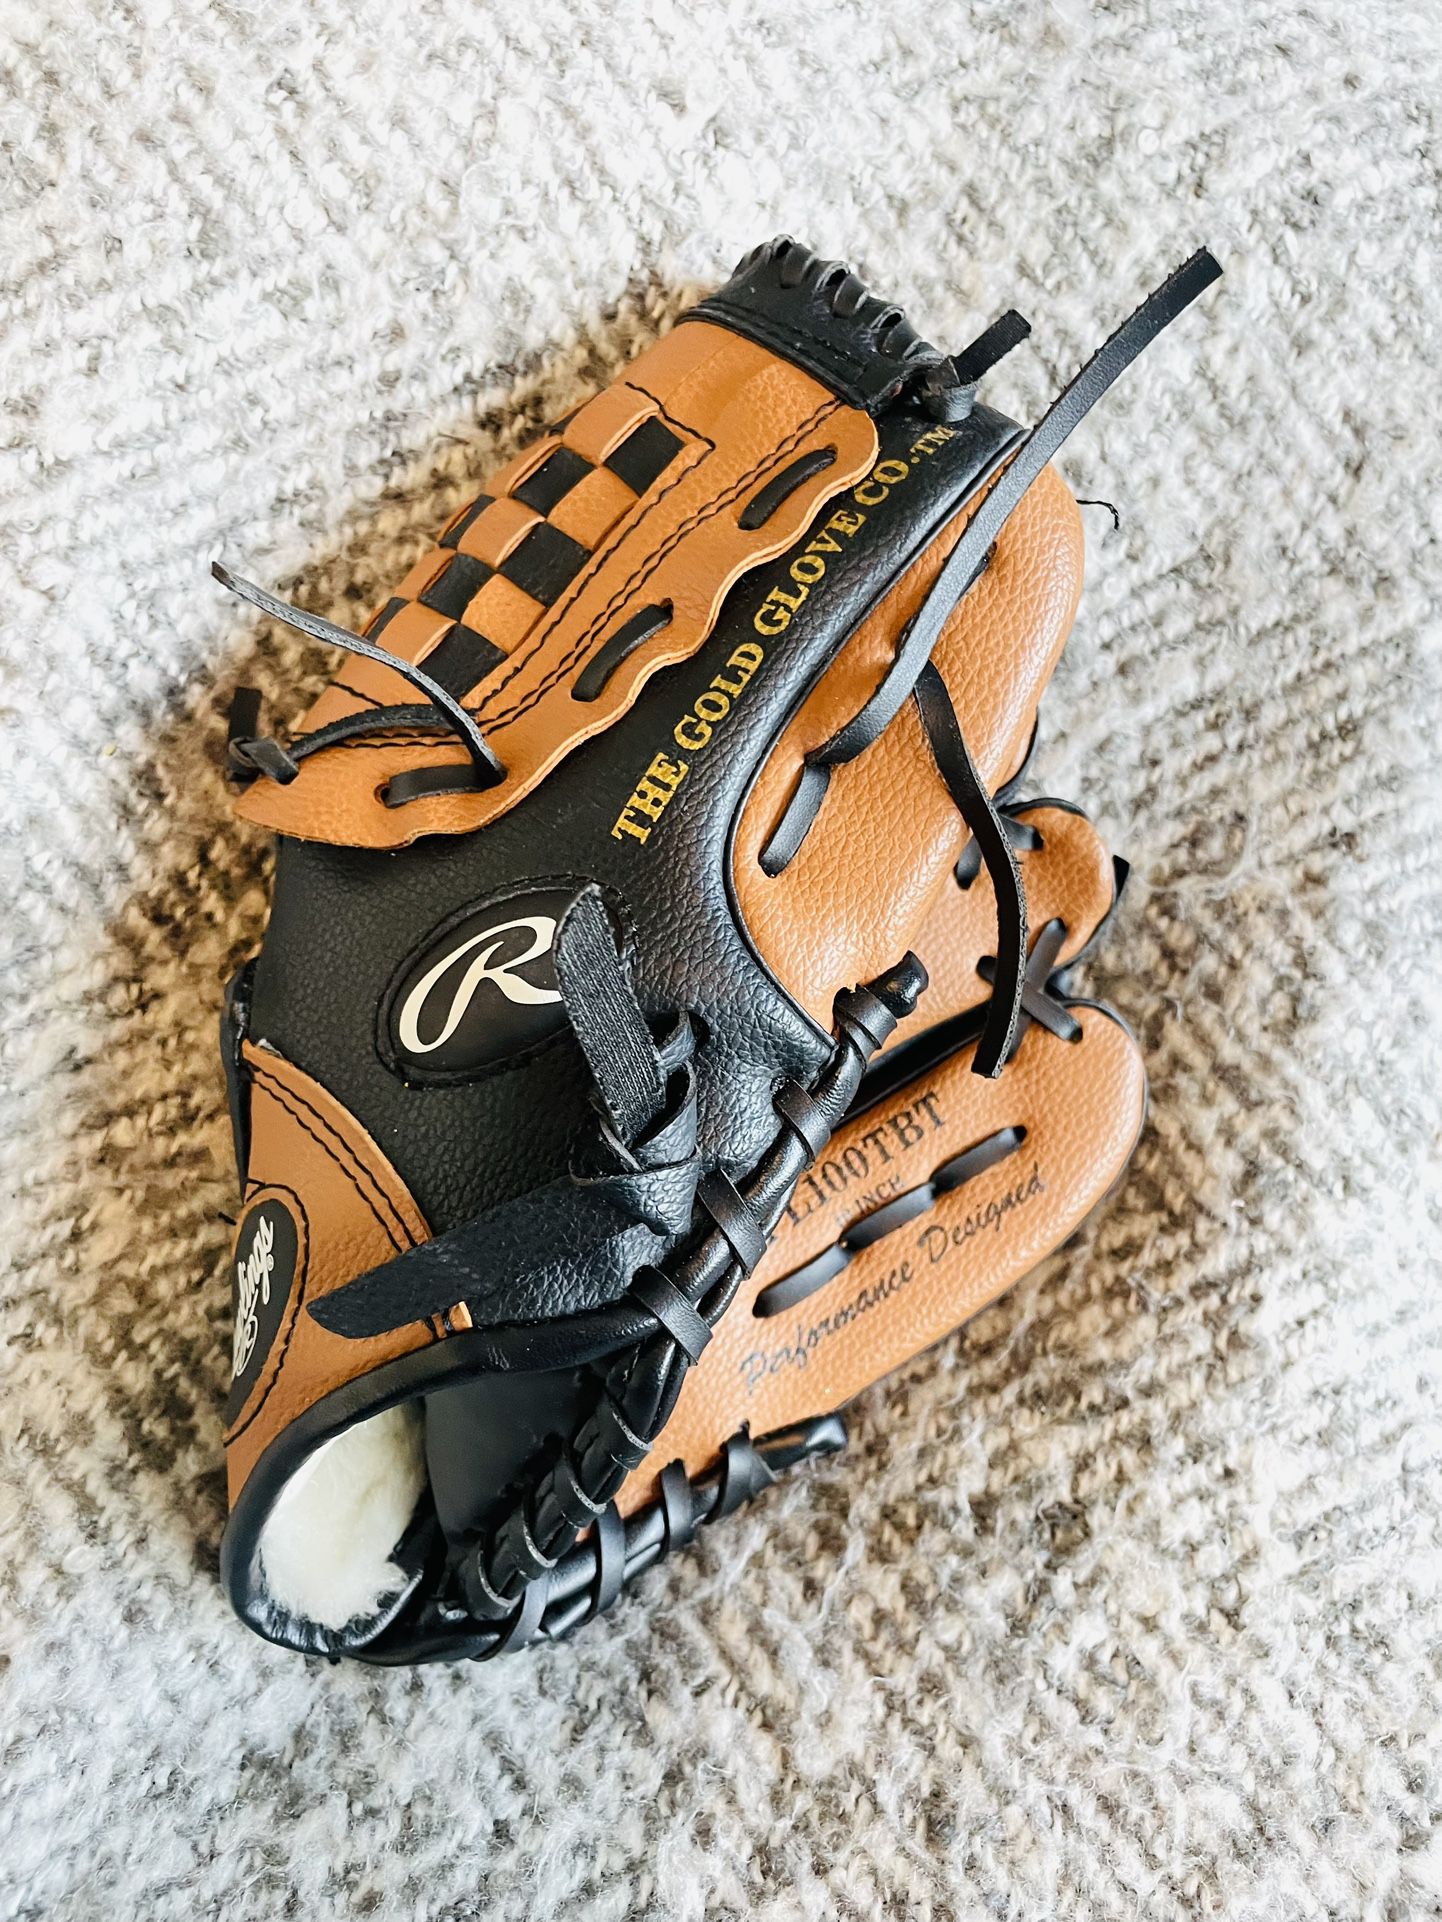 New Rawlings 10inch Player Series Glove 